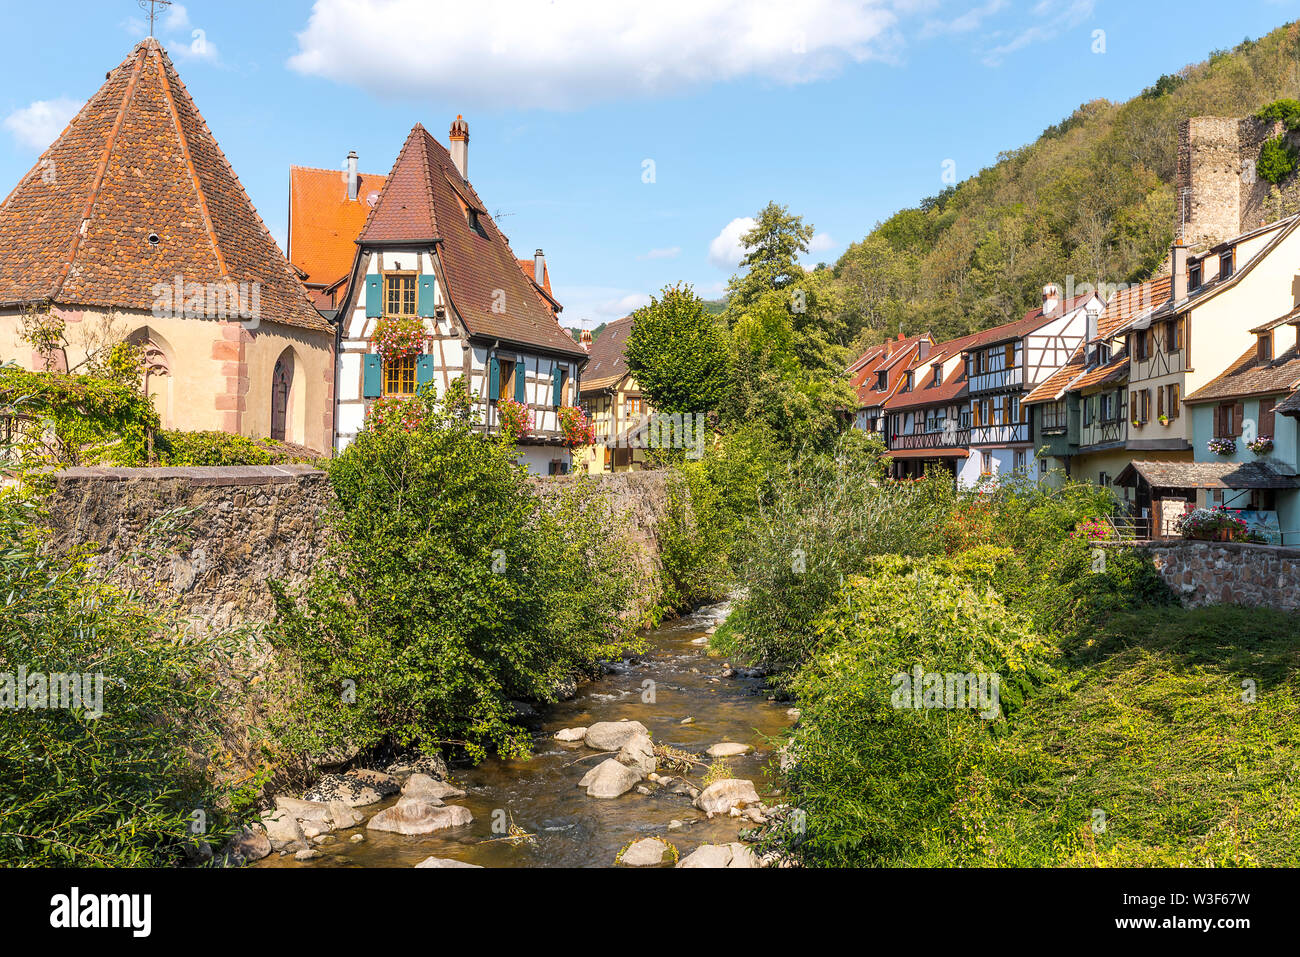 scenic corner in the centre of the village Kaysersberg, Alsace Wine Route, France, old half-timbered houses and Chapelle de l'Oberhof at the river Stock Photo